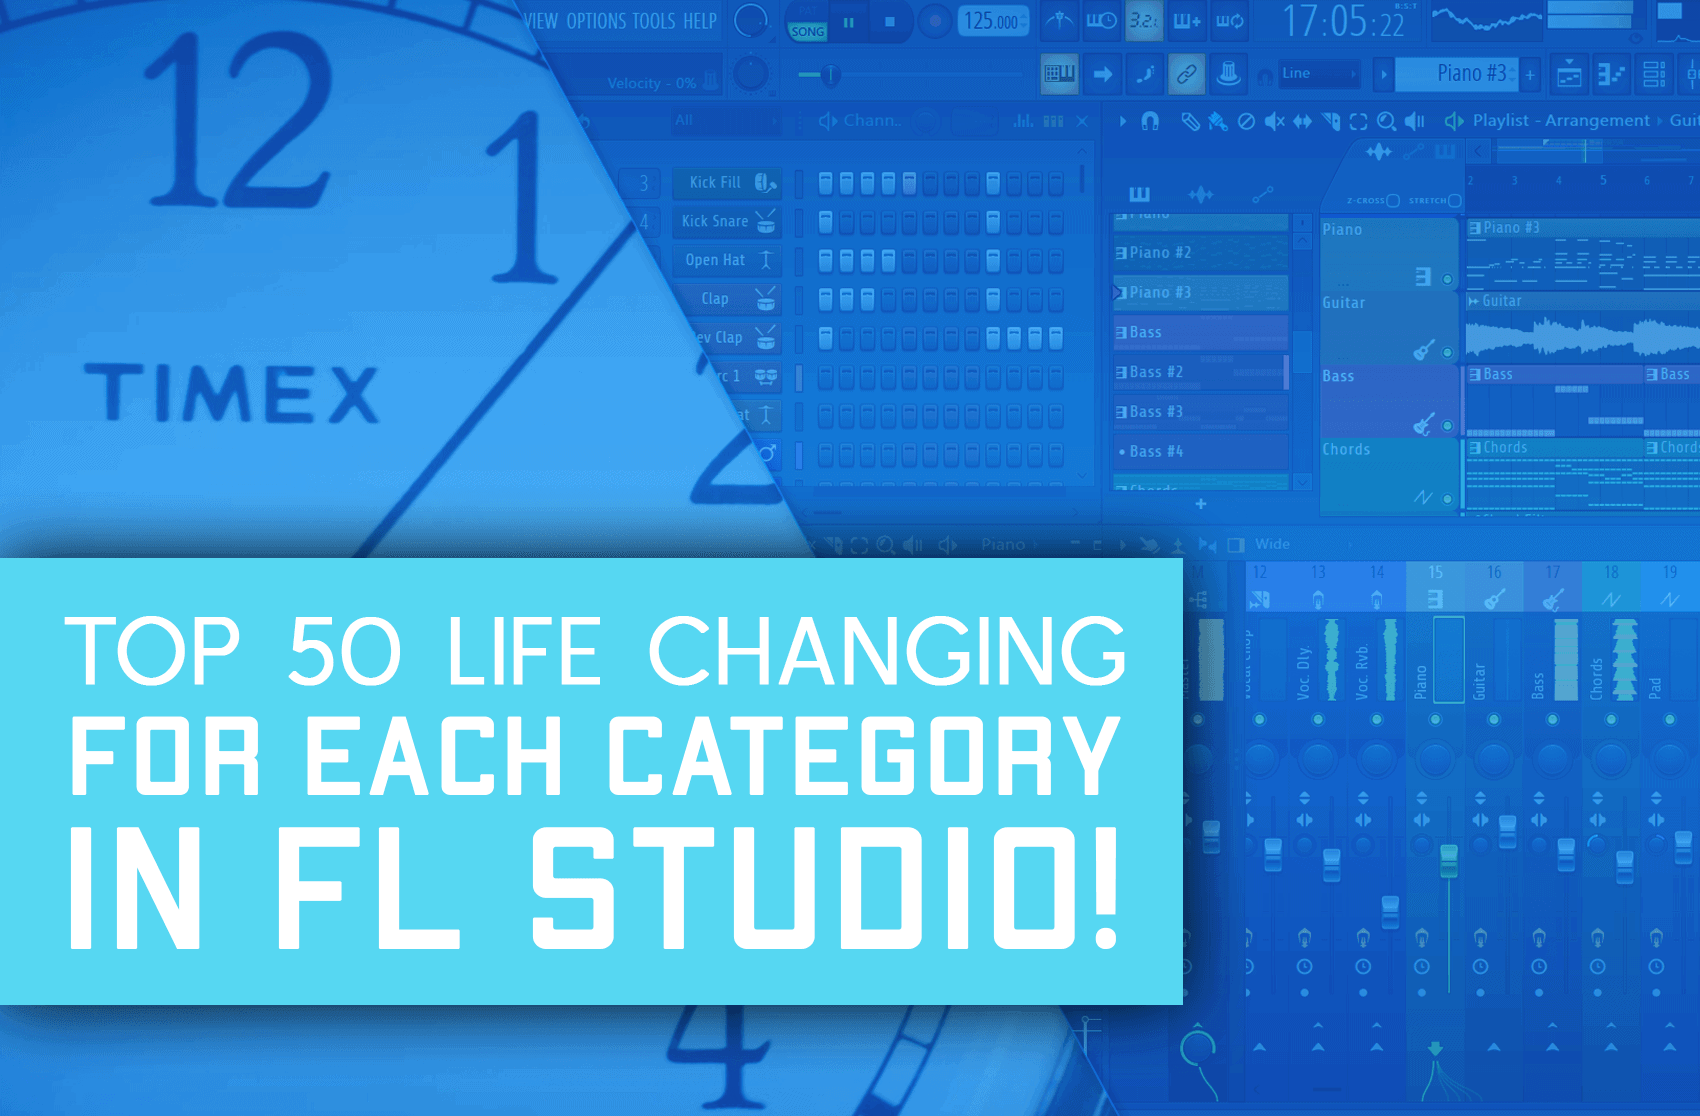 Top 50 Life Changing FL Studio Shortcuts By Category! - Wealthy Sound |  Mixing and Production Tutorials